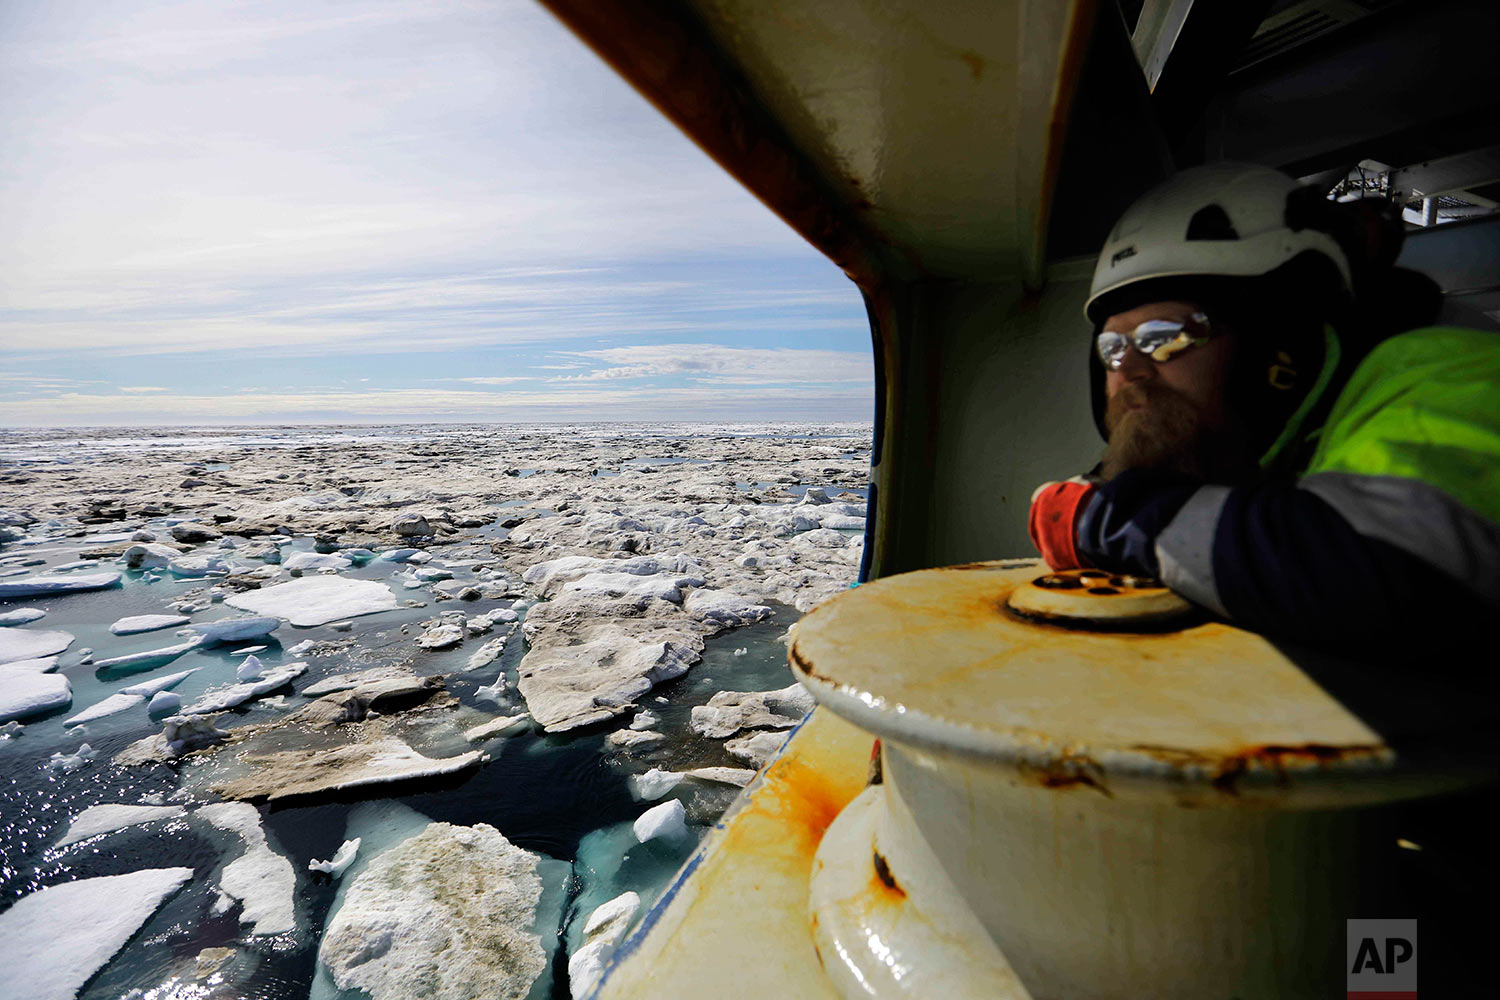  Trainee Jussi Mikkotervo looks out from the bow of the Finnish icebreaker MSV Nordica as it sails through ice floating on the Beaufort Sea off the coast of Alaska while traversing the Arctic's Northwest Passage, Sunday, July 16, 2017. Although the p